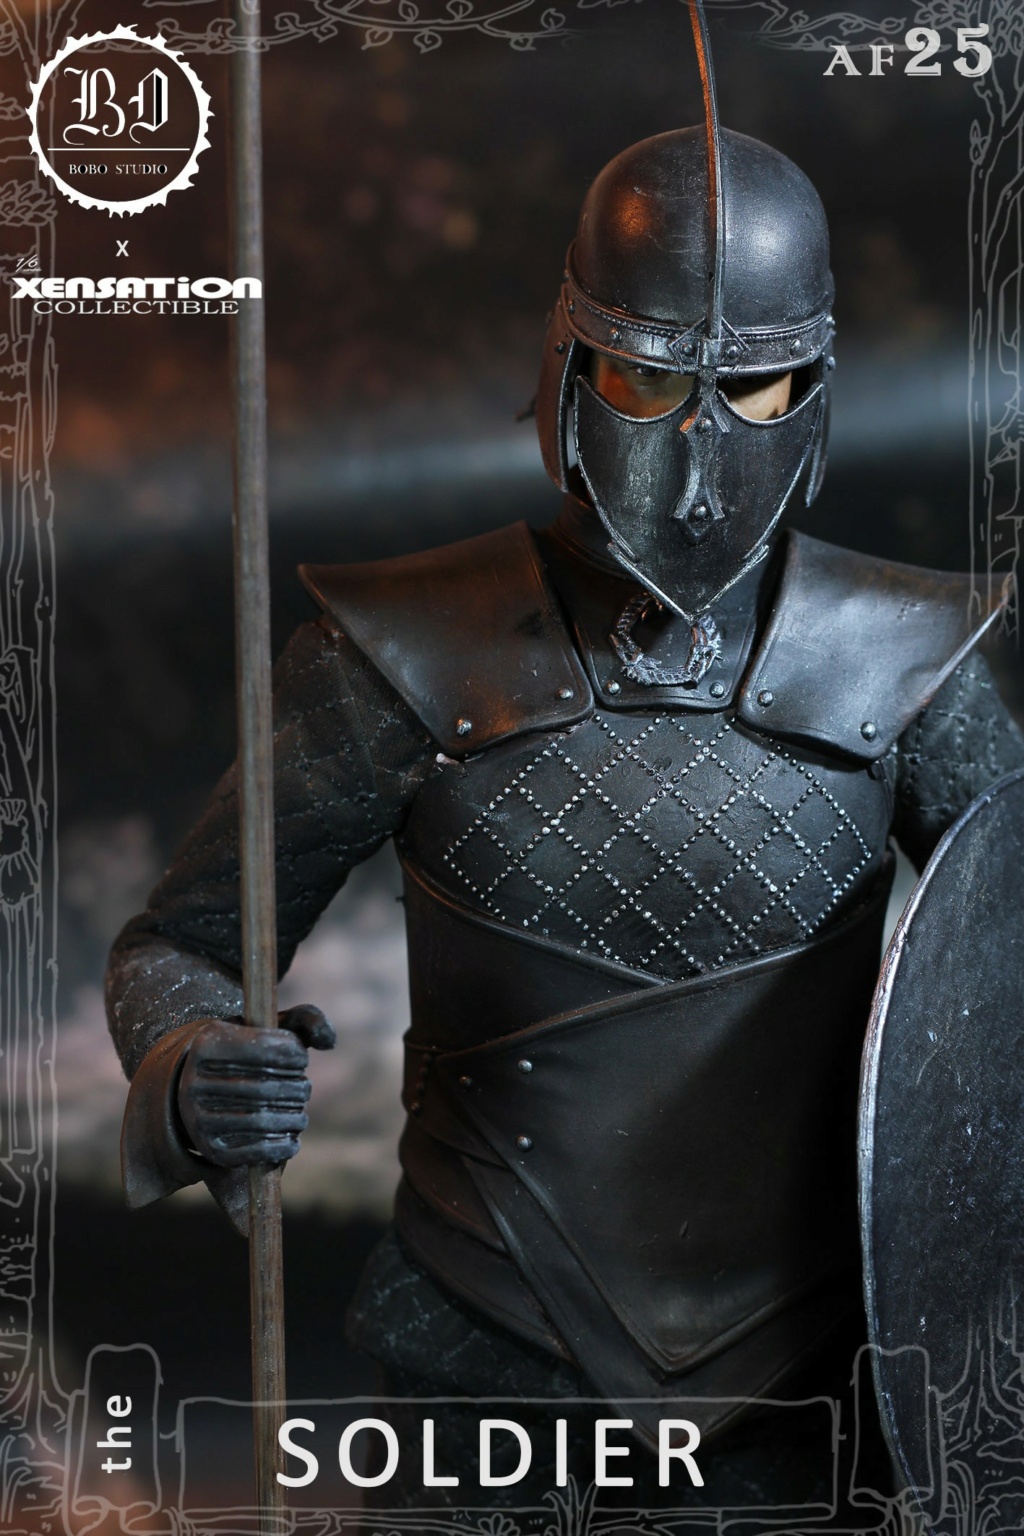 GreyWorm - NEW PRODUCT: Xensation Collectible & BoBo Studio: 1/6 Grey Worm Soldier Collectible Doll AF25 16134710